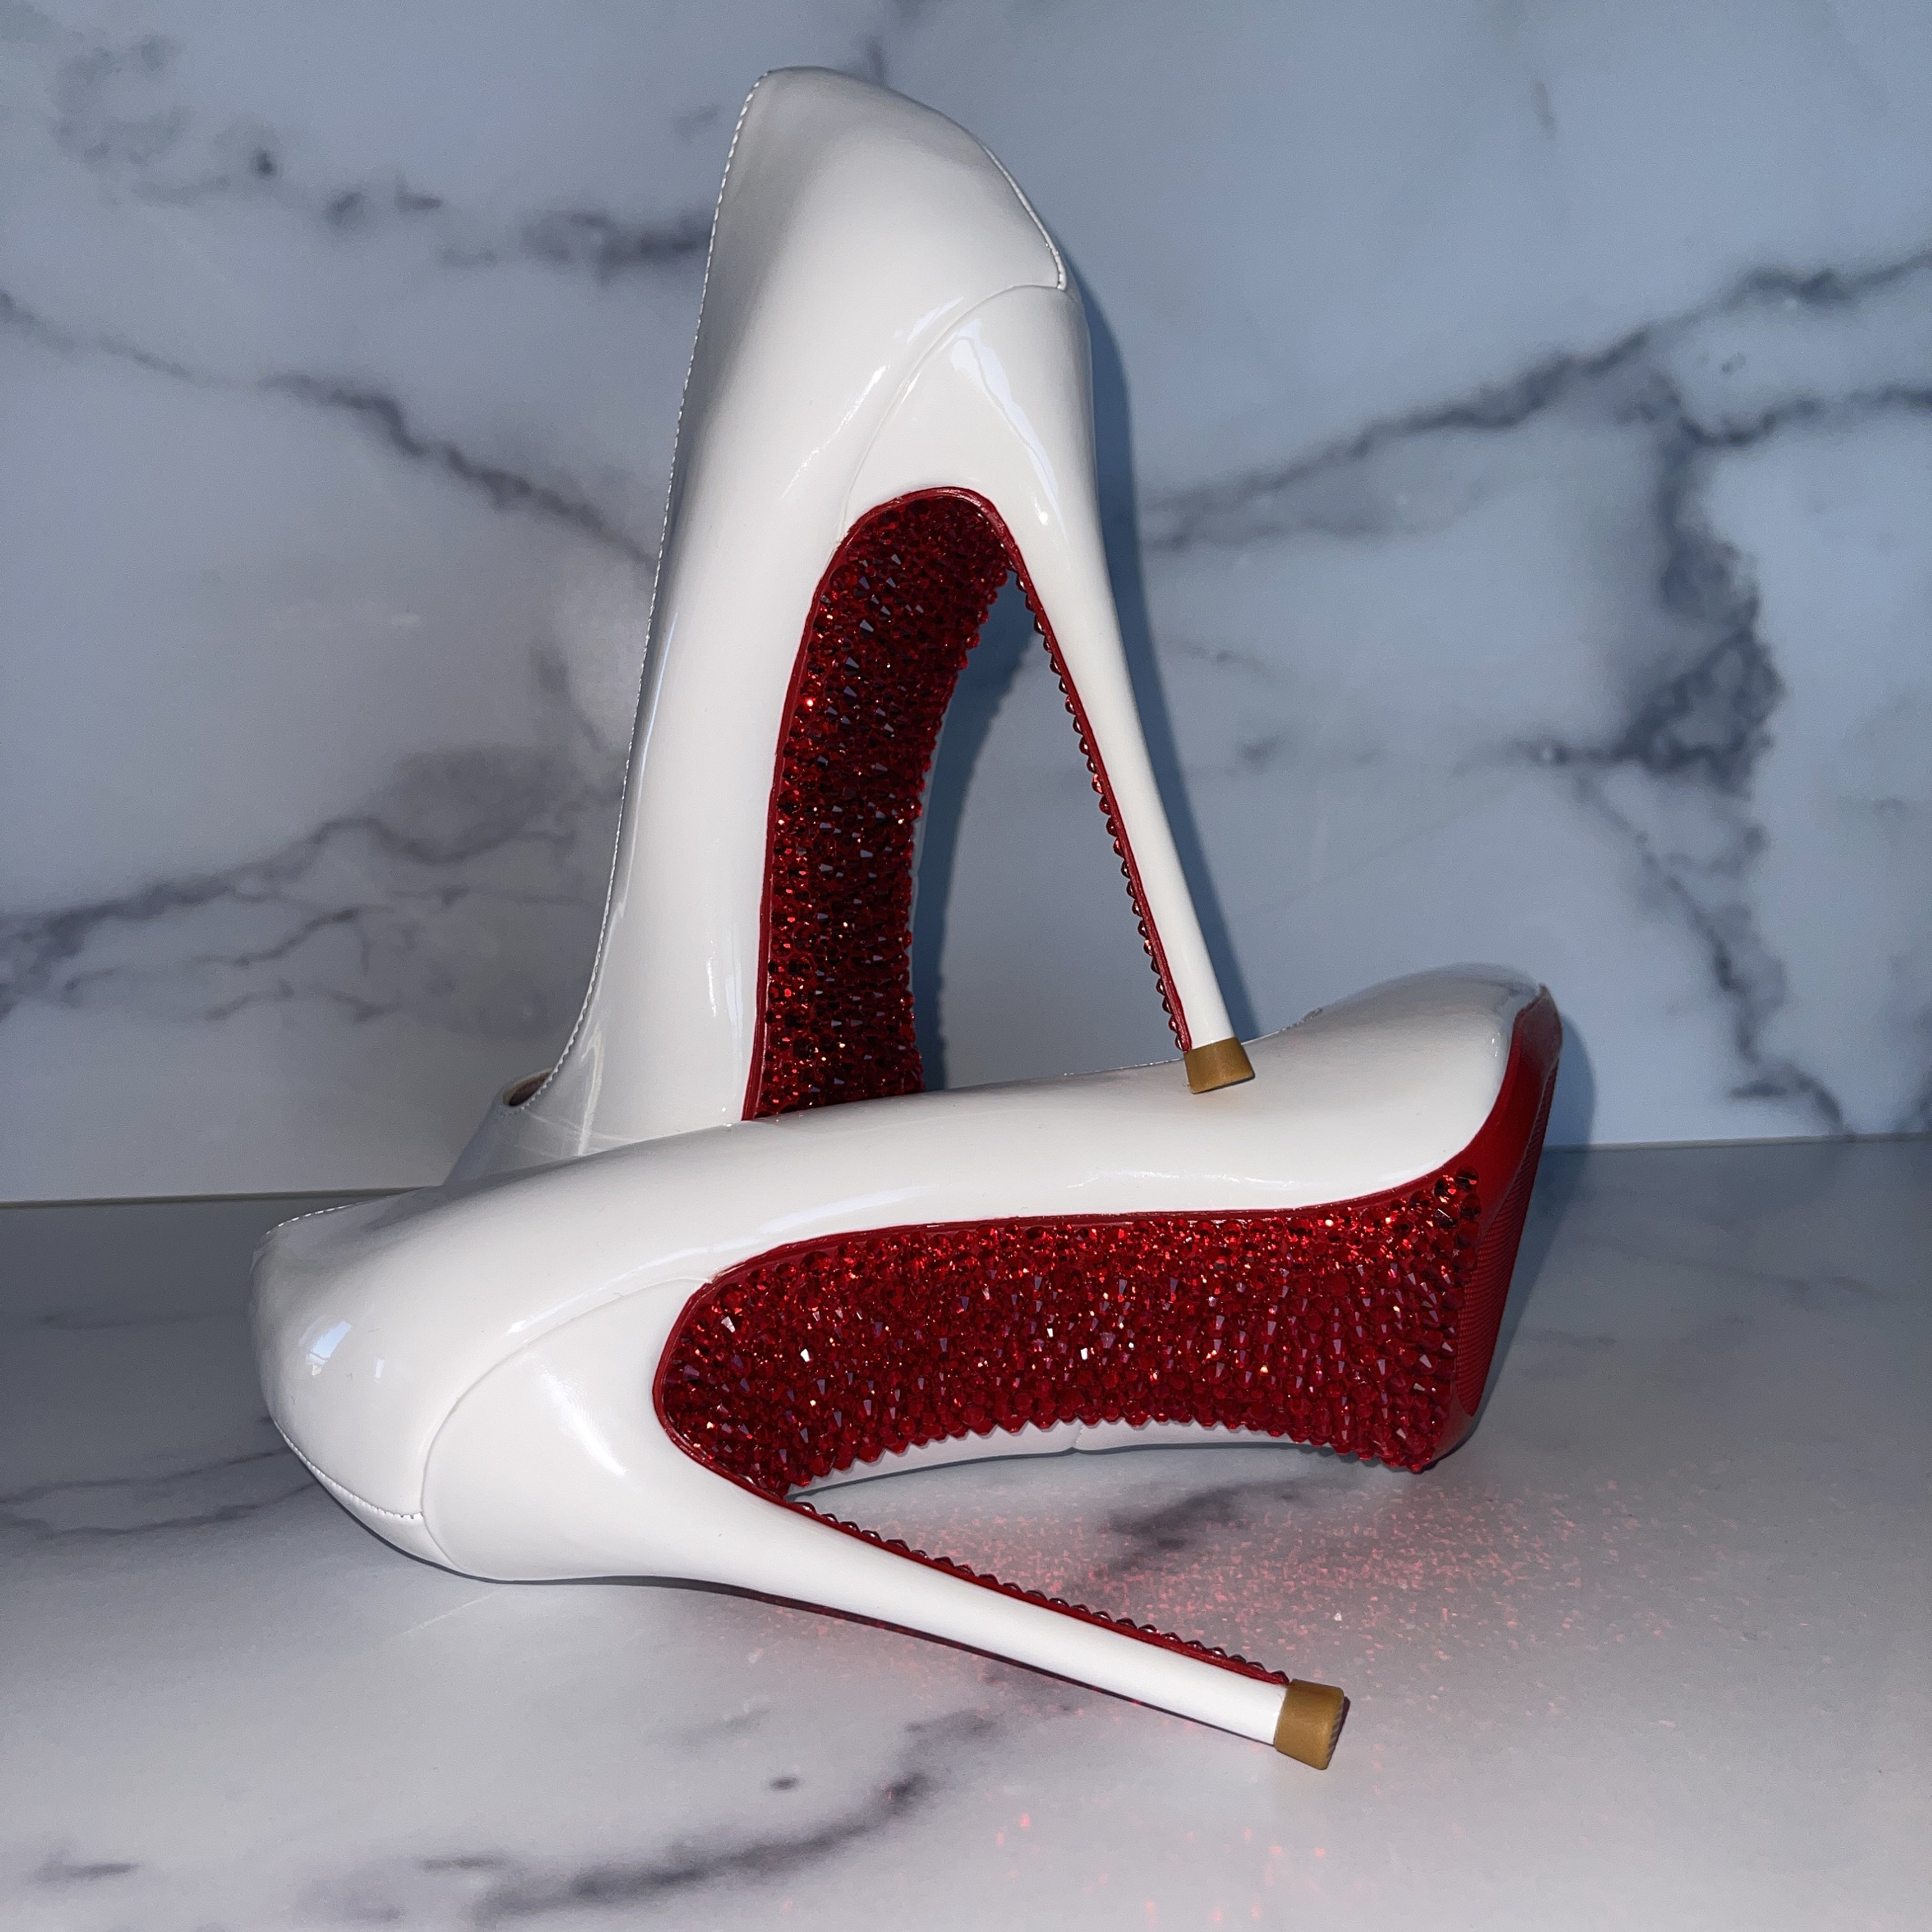 shoes louis vuitton high heels black red red high heels luxury brands  Louis  vuitton high heels, Louis vuitton shoes heels, Christian louboutin shoes